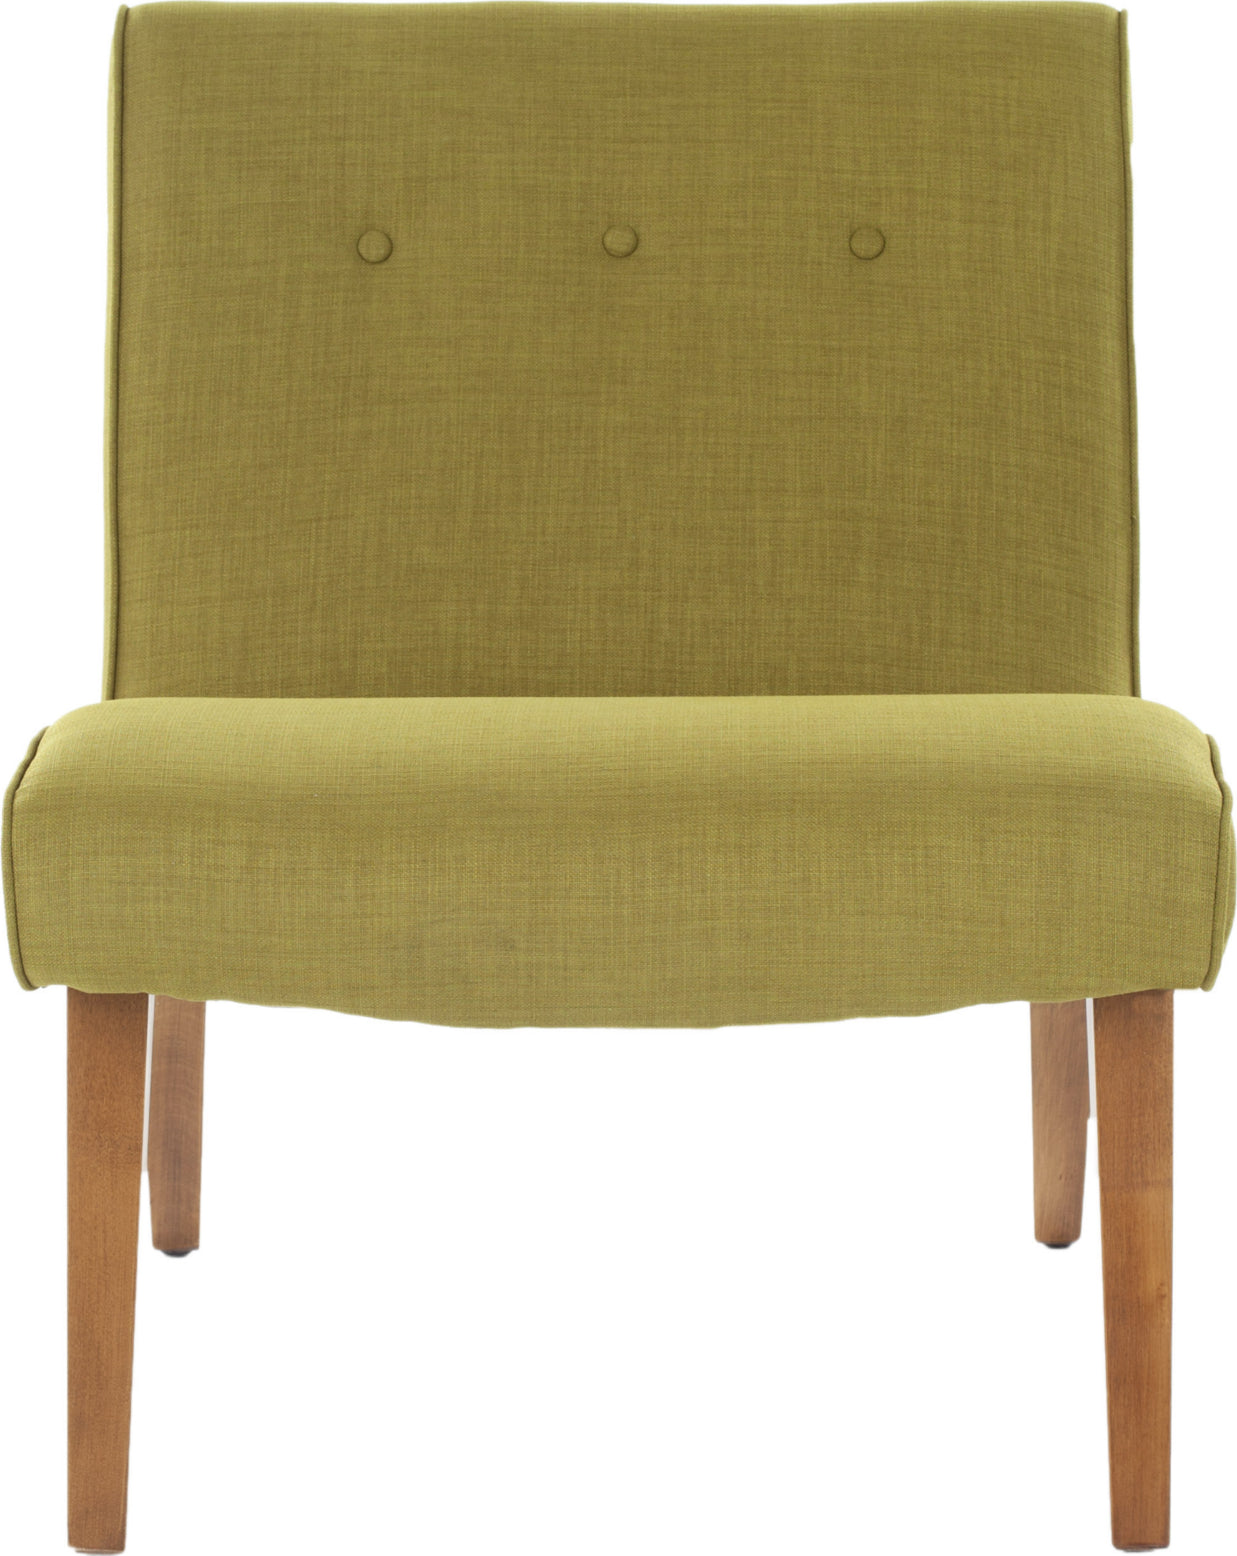 Safavieh Mandell Chair With Buttons Sweet Pea Green and Natural Oak Finish Furniture main image